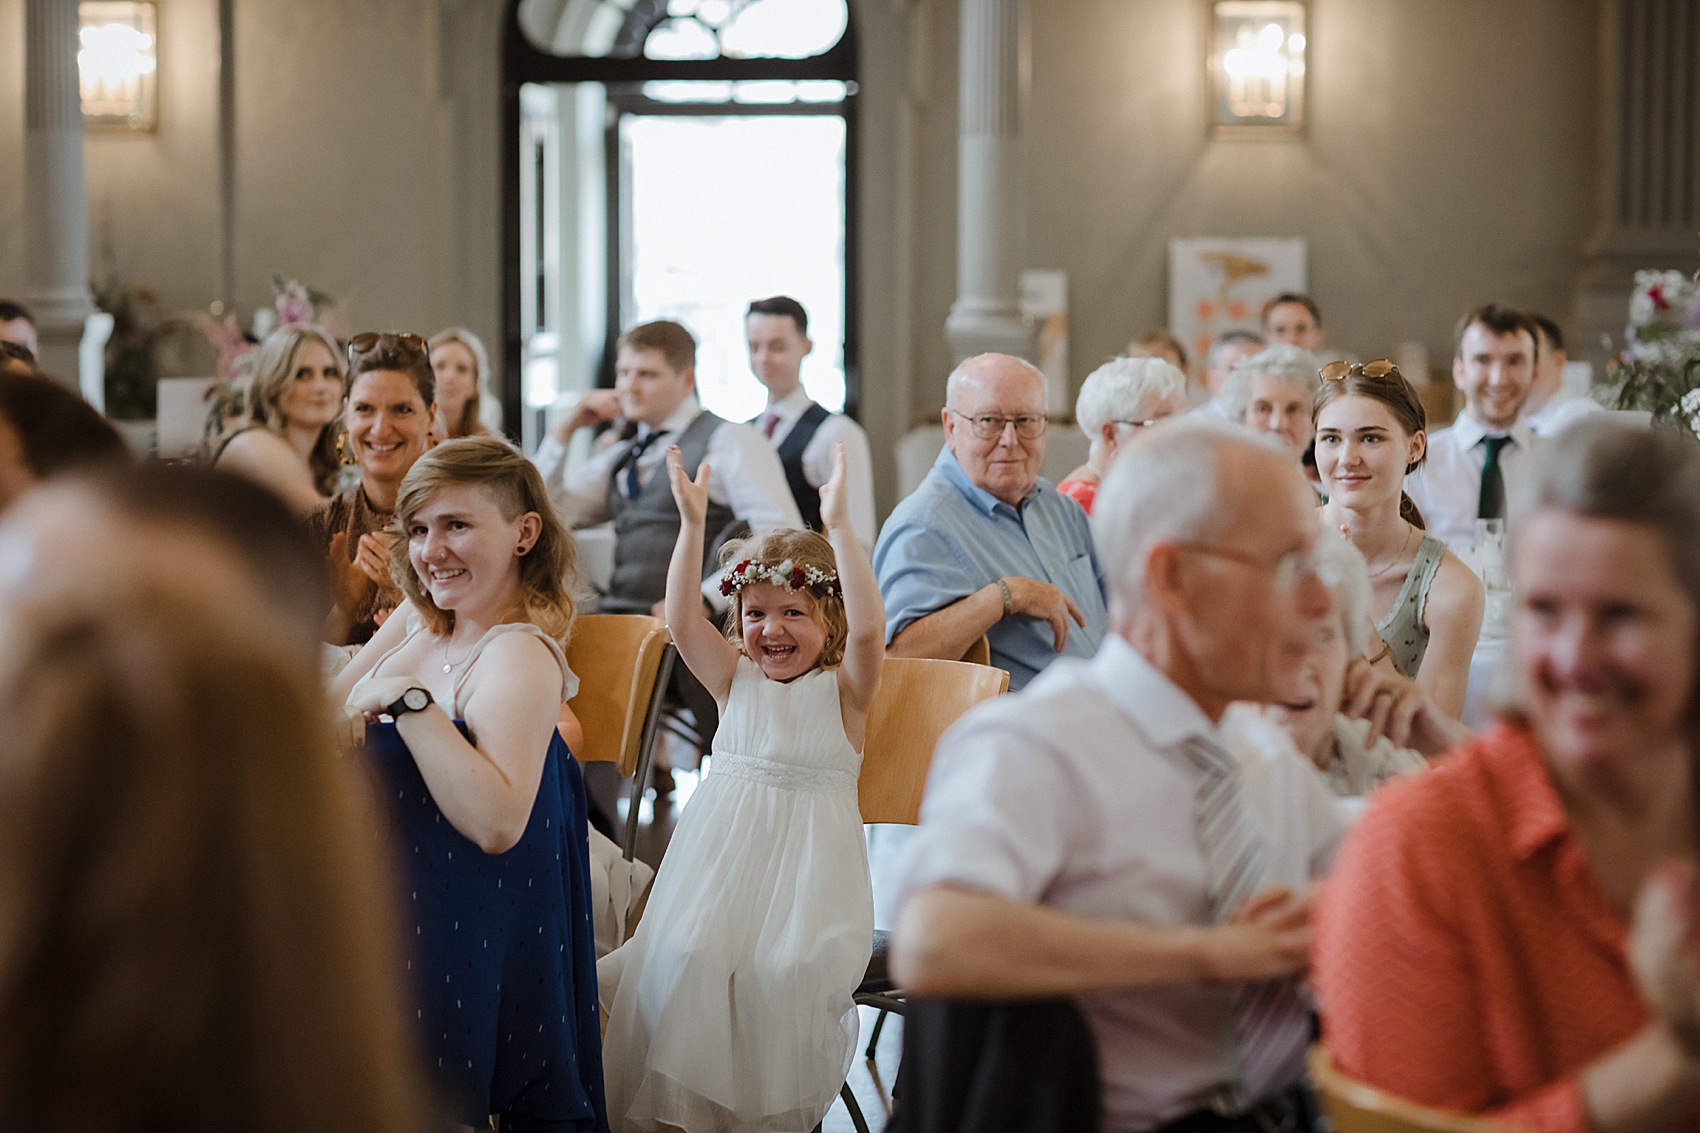 Andrea Hawkes bride Glasgow city wedding  - A Modern, Sequin + Backless Andrea Hawkes Dress for a Stylish Glasgow City Wedding full of Flowers and Joy